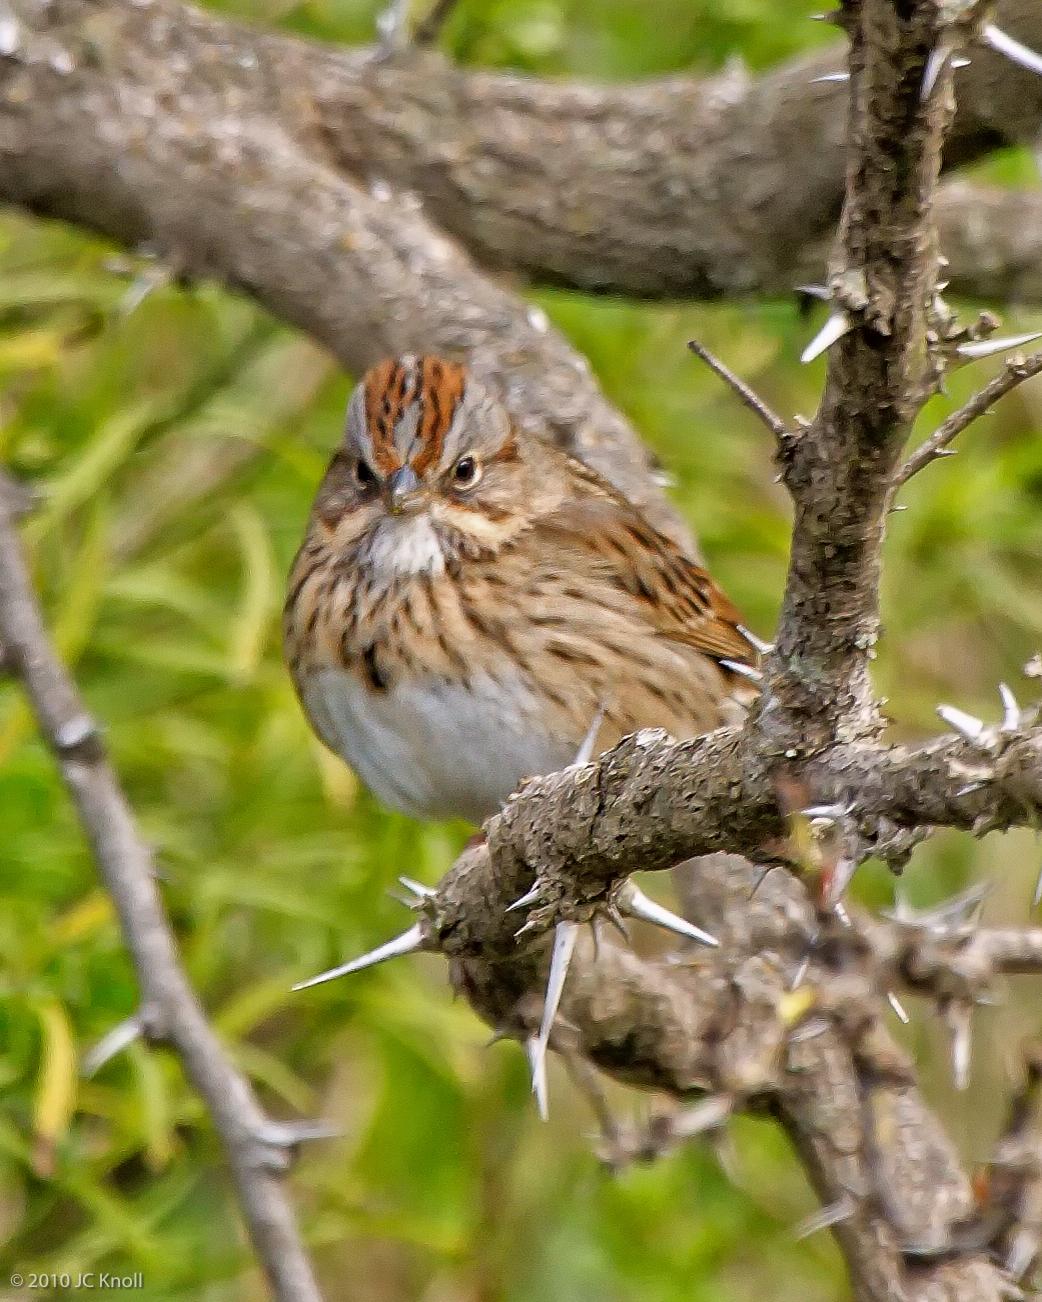 Lincoln's Sparrow Photo by JC Knoll